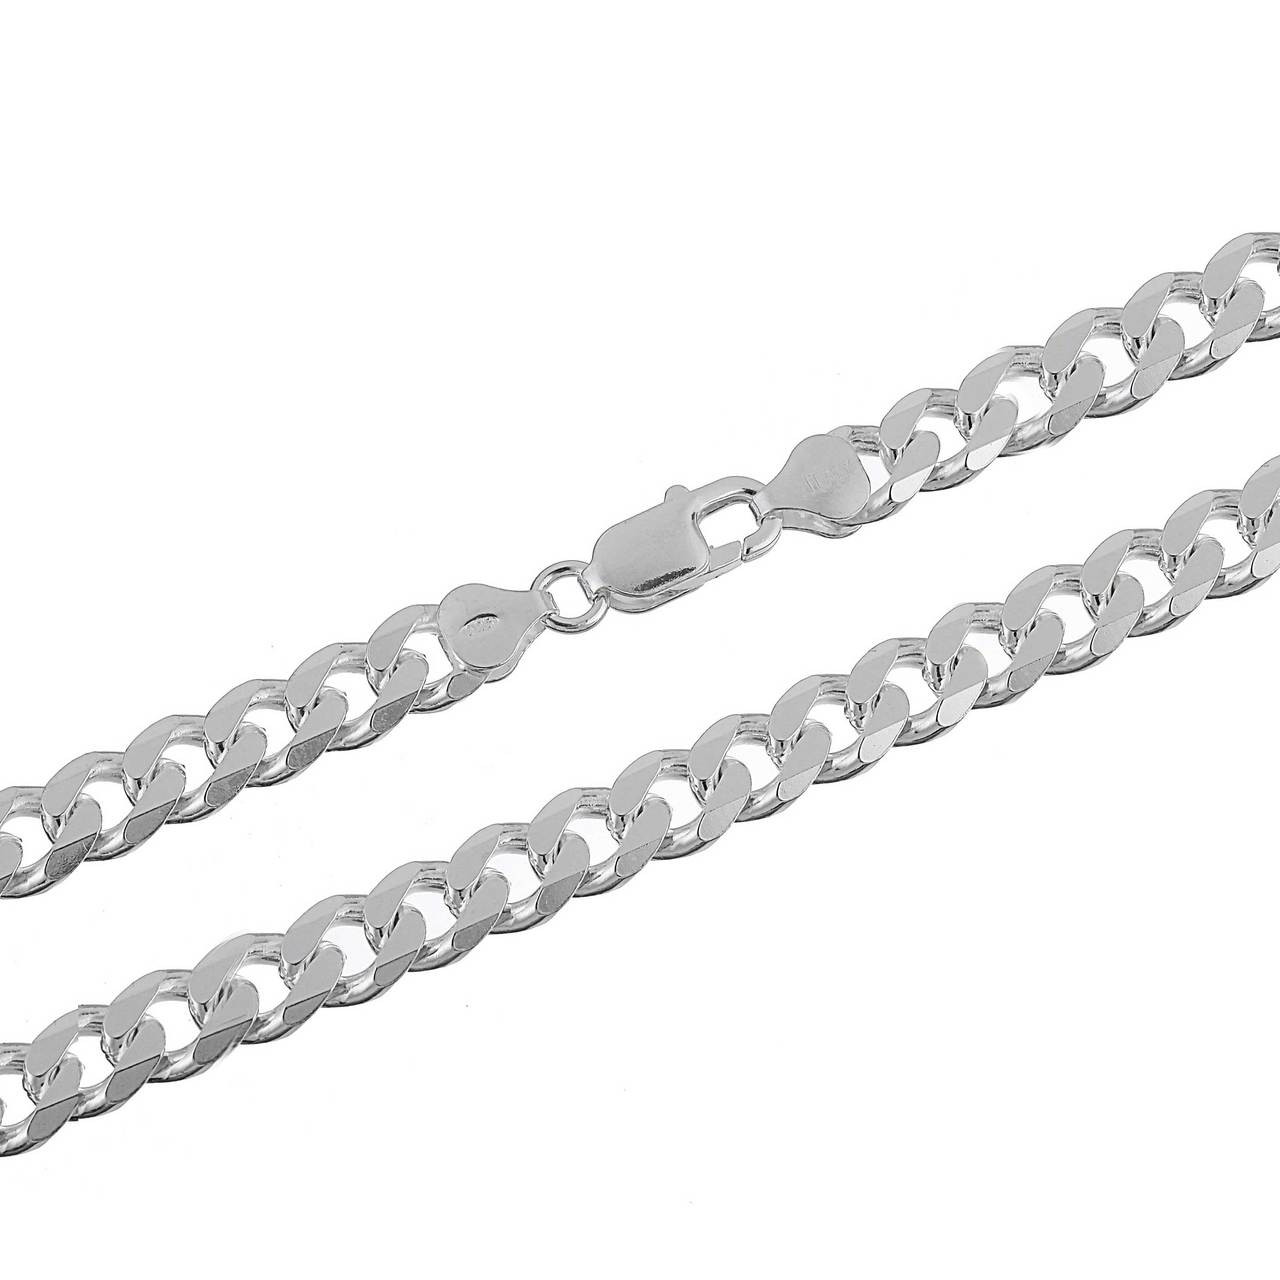 30 inch Sterling Silver Chain, 76 cm Long Chain, Finished Chain for Necklaces